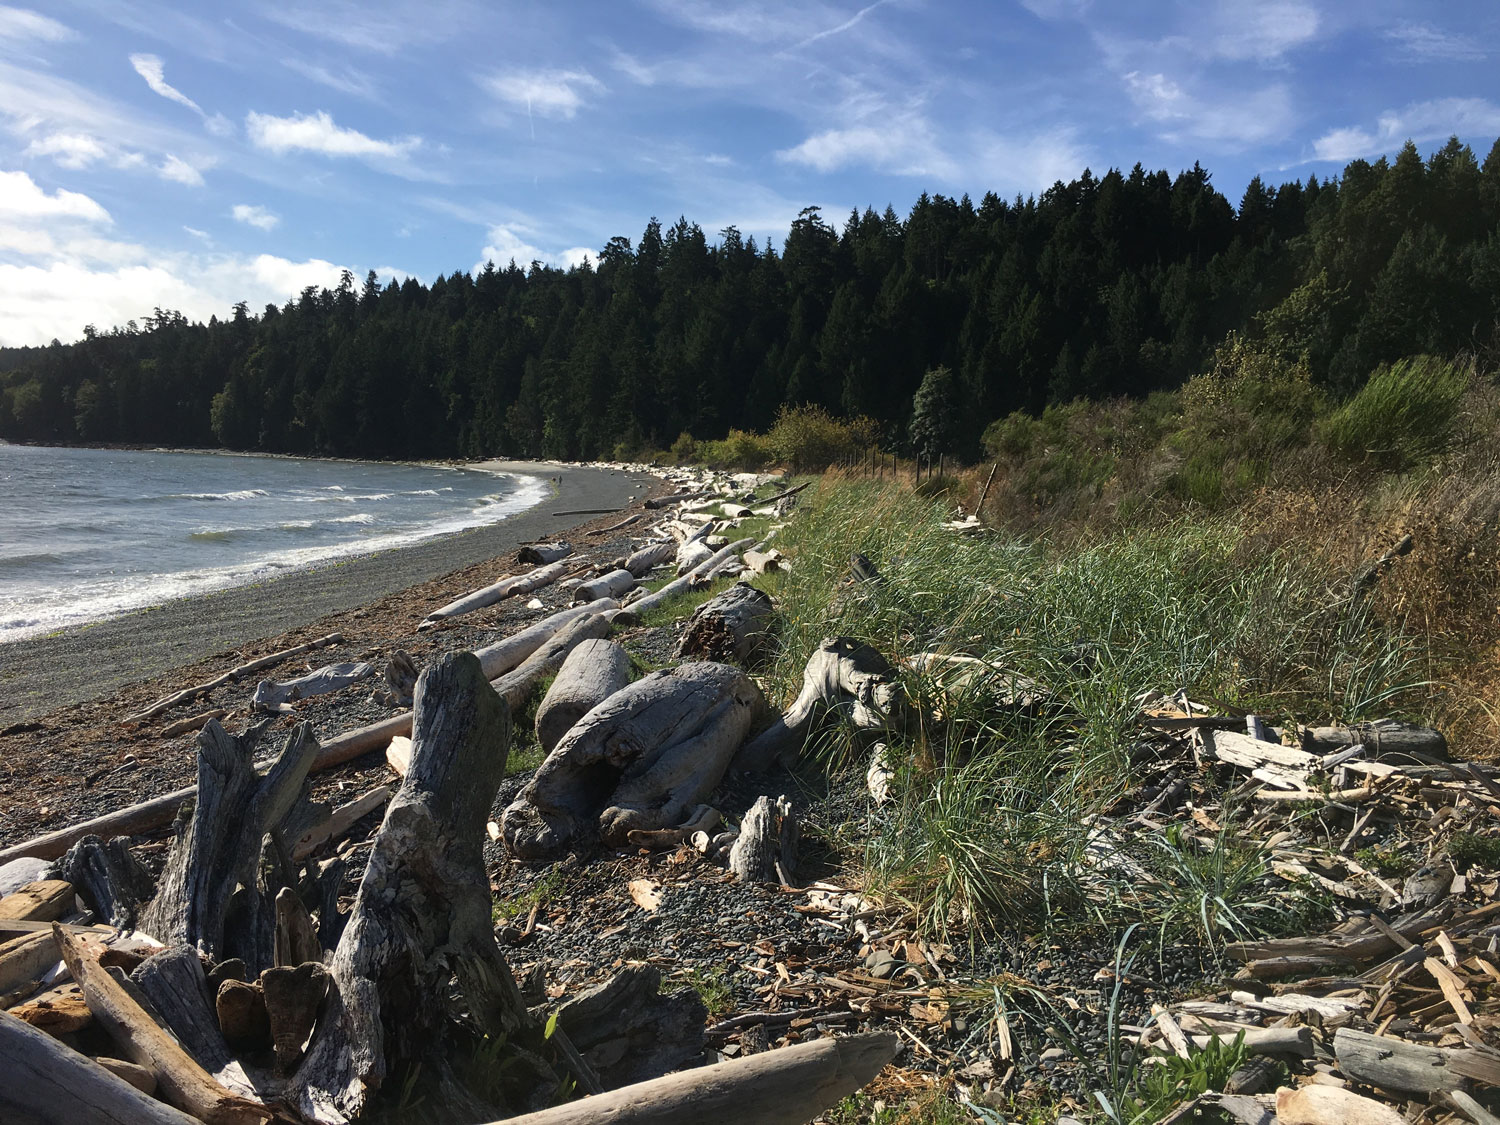 View looking along Sandwell Provincial Park beach with forest in the background. Beach is tiny pebbles, above which are beach logs and grasses.